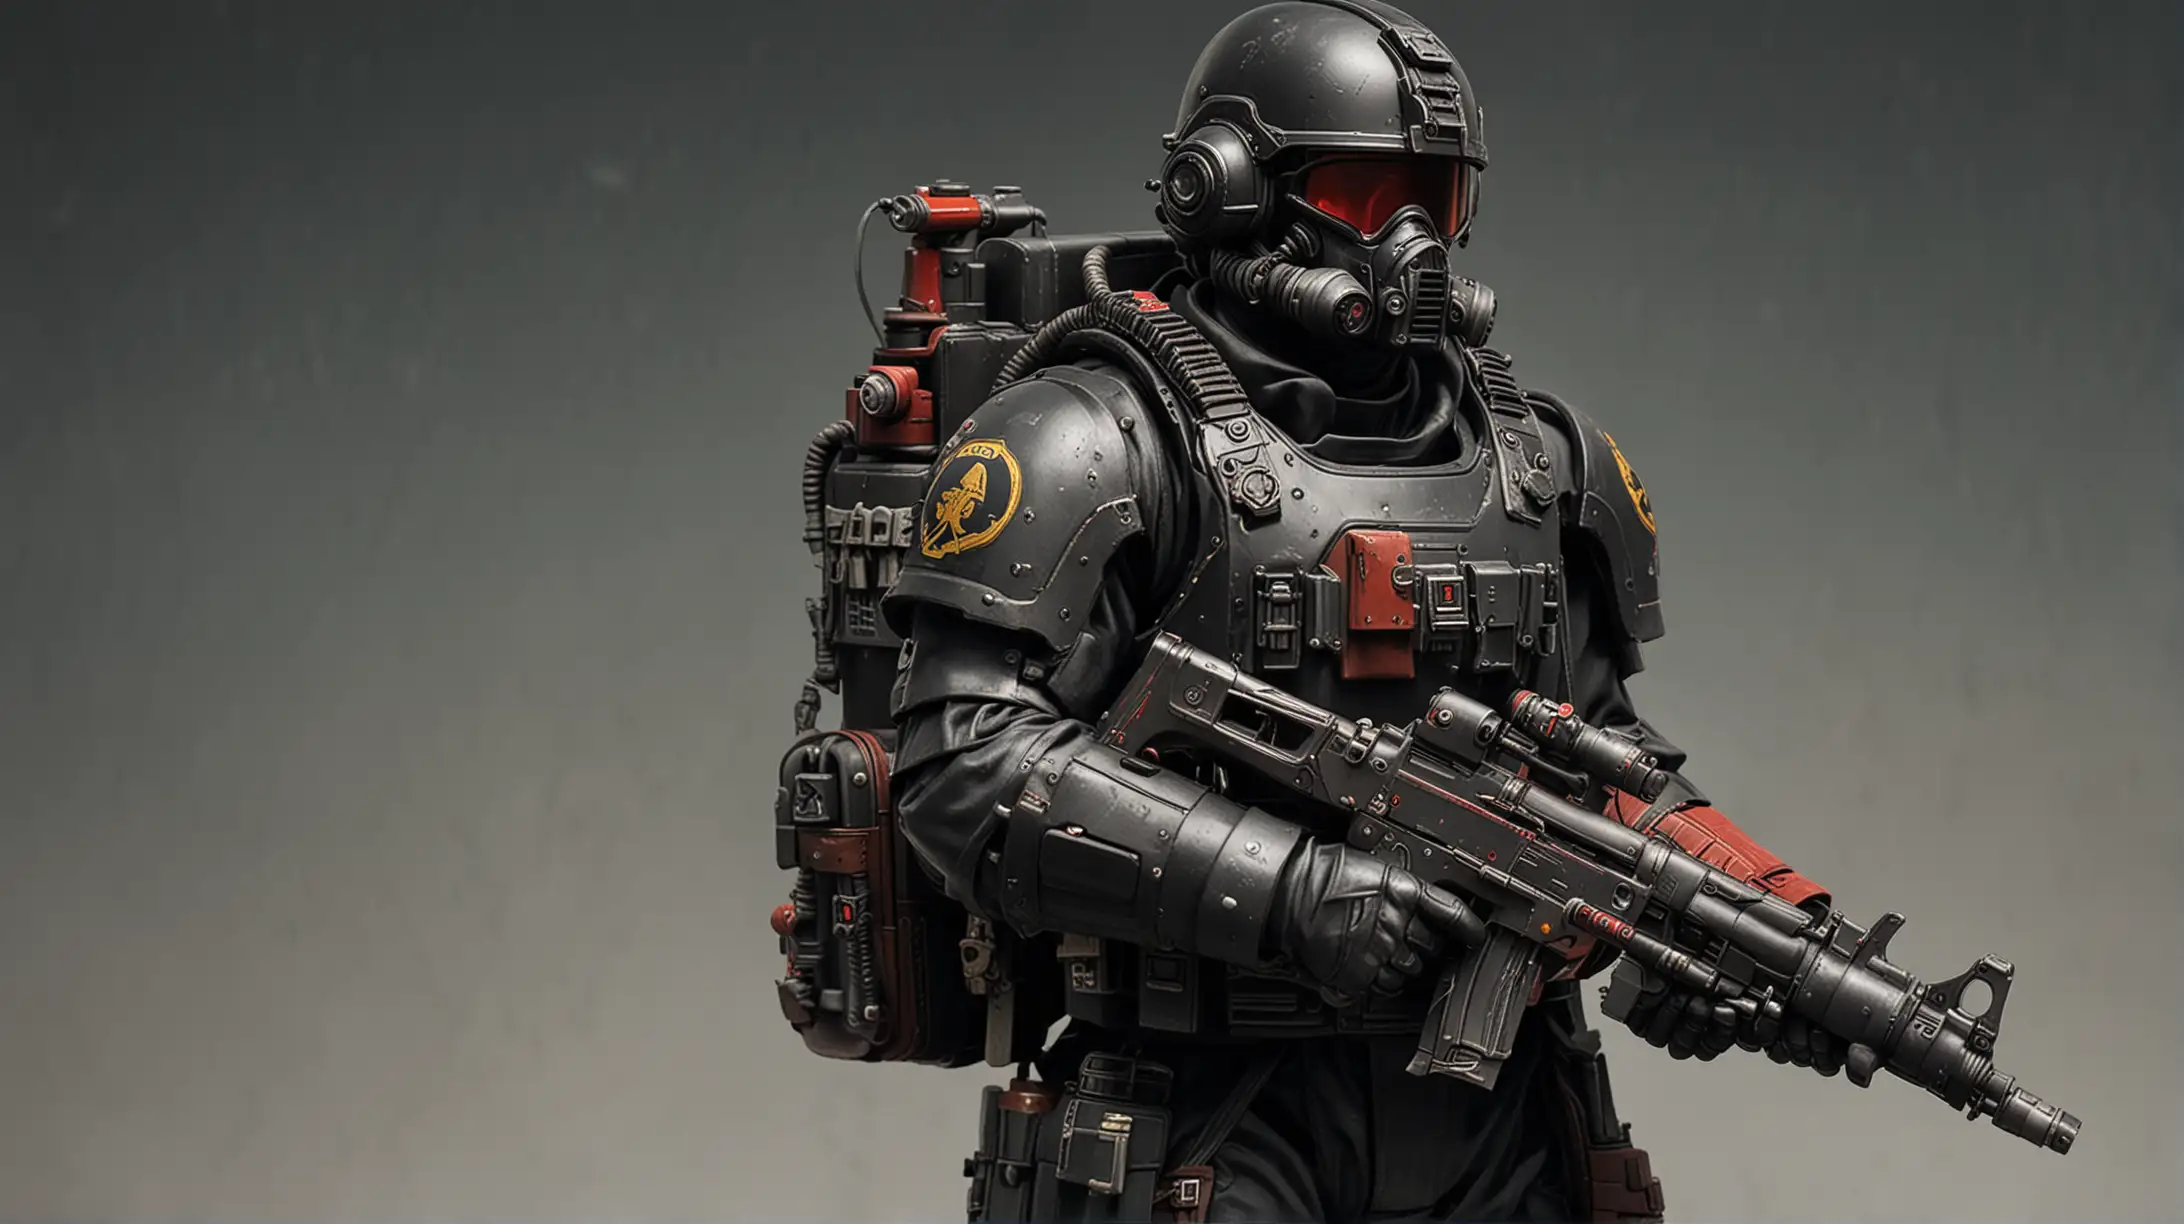 Imperial Guard Soldier in Closed Environment Suit with SMG